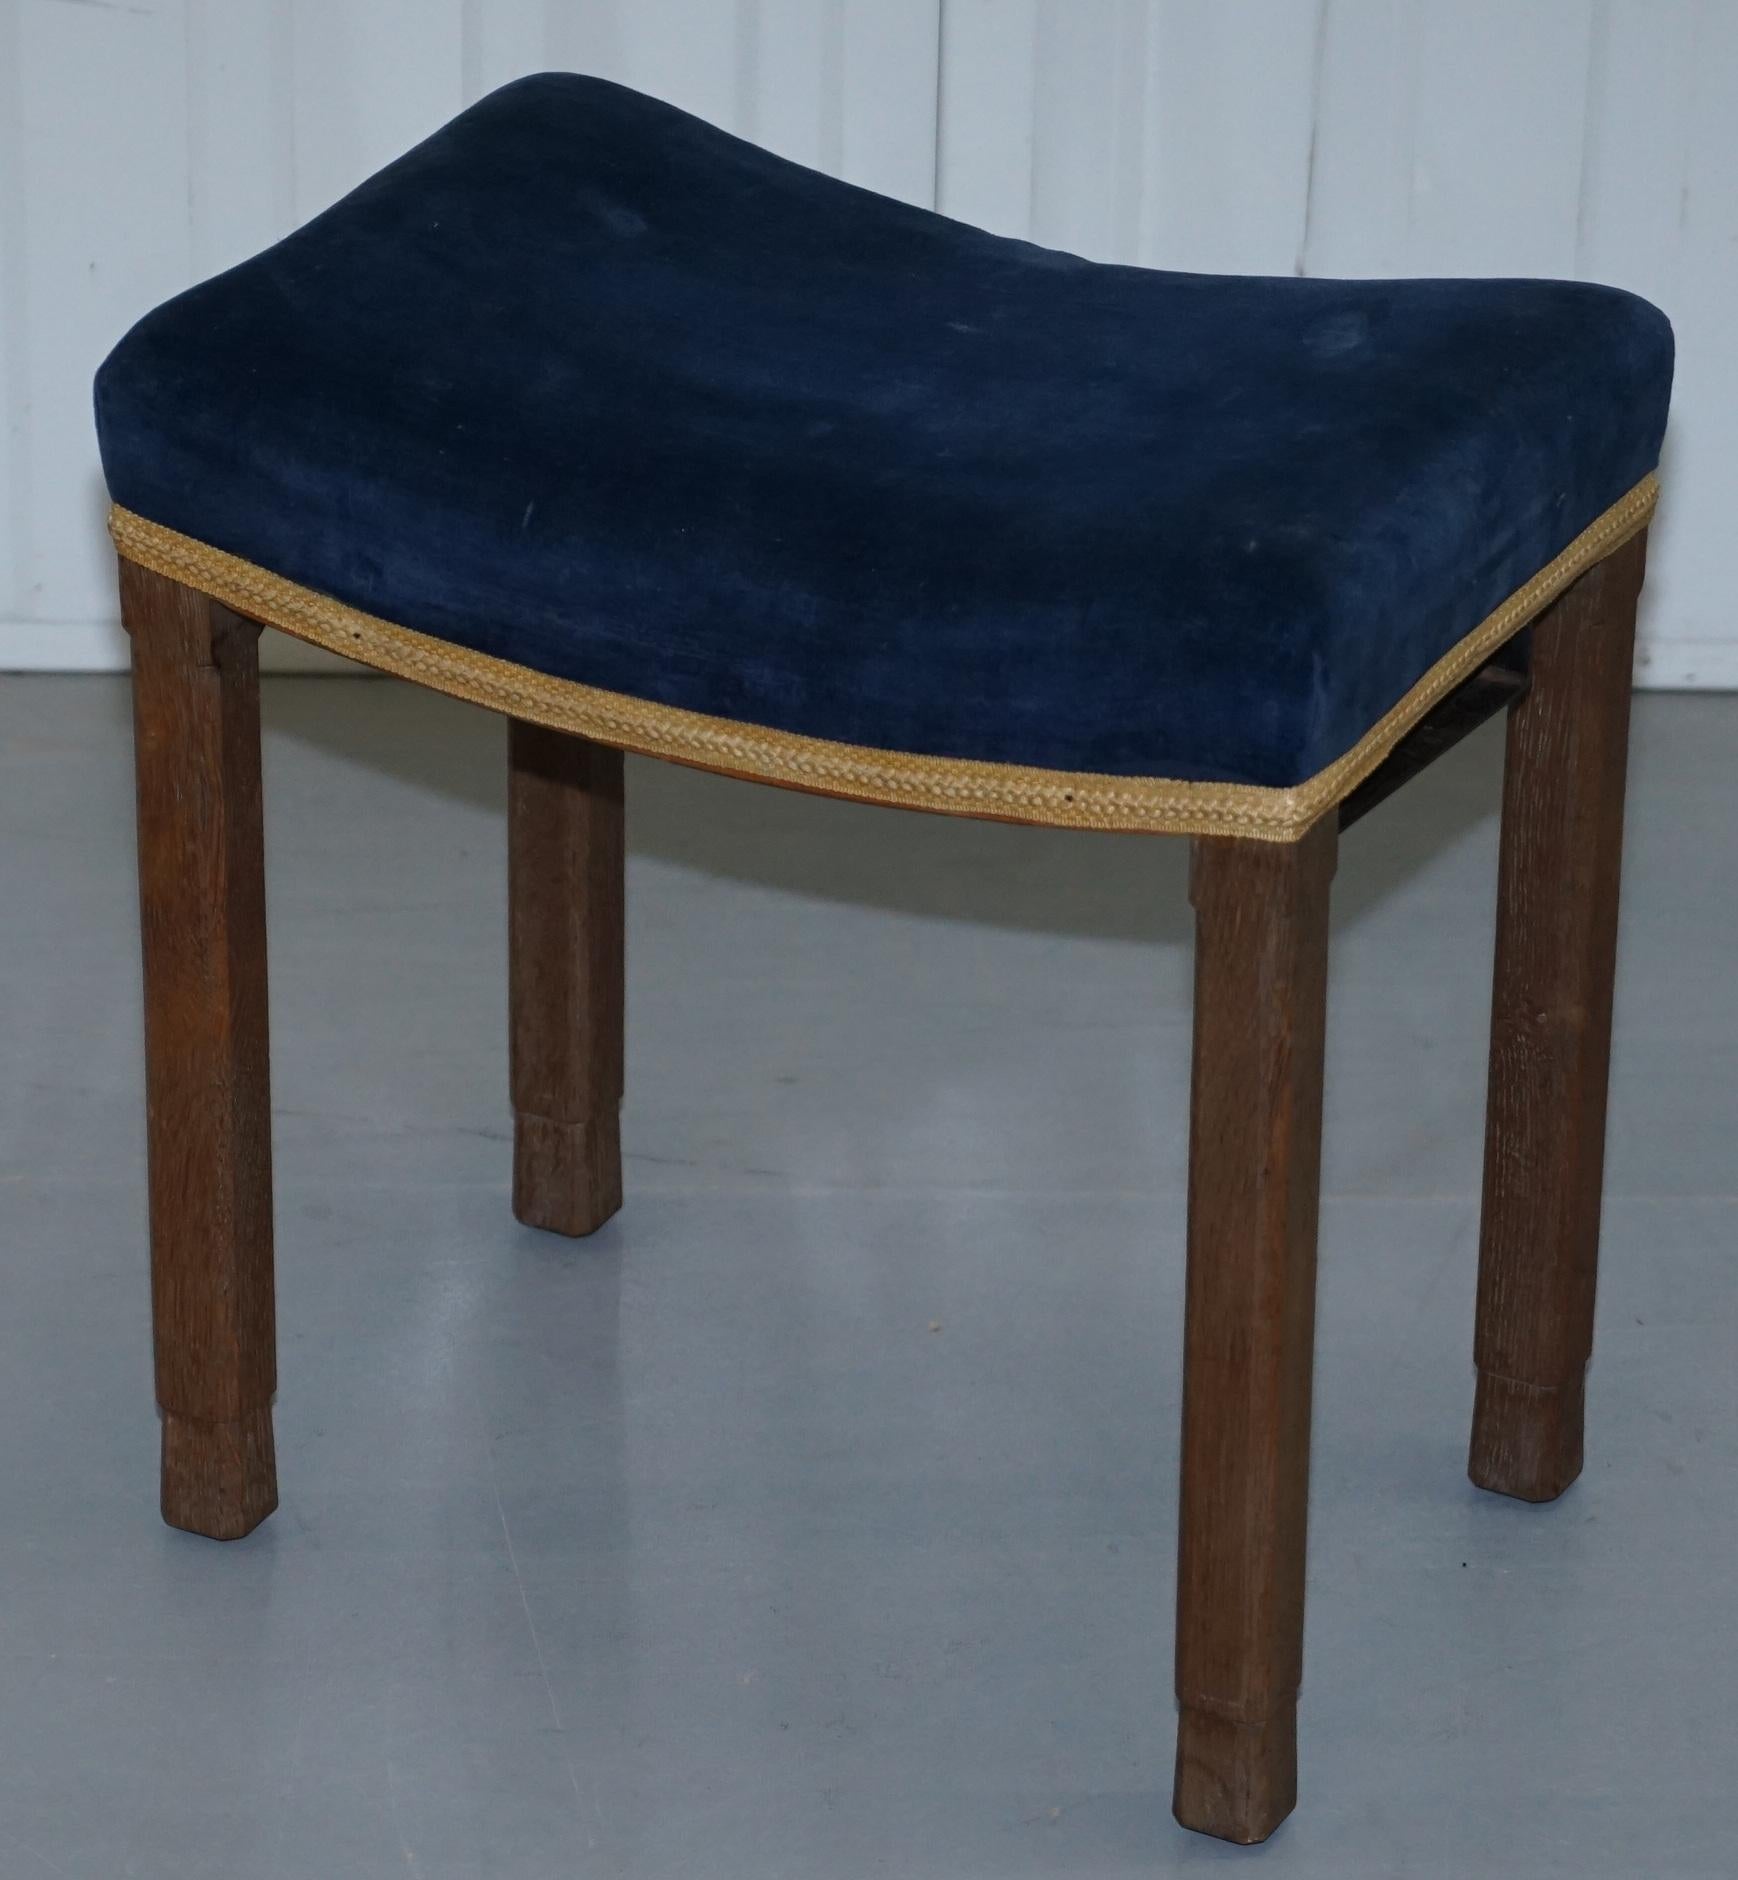 Mid-20th Century Rare Original King George vi Coronation Stool 1937 Limed Oak by Waring & Gillow